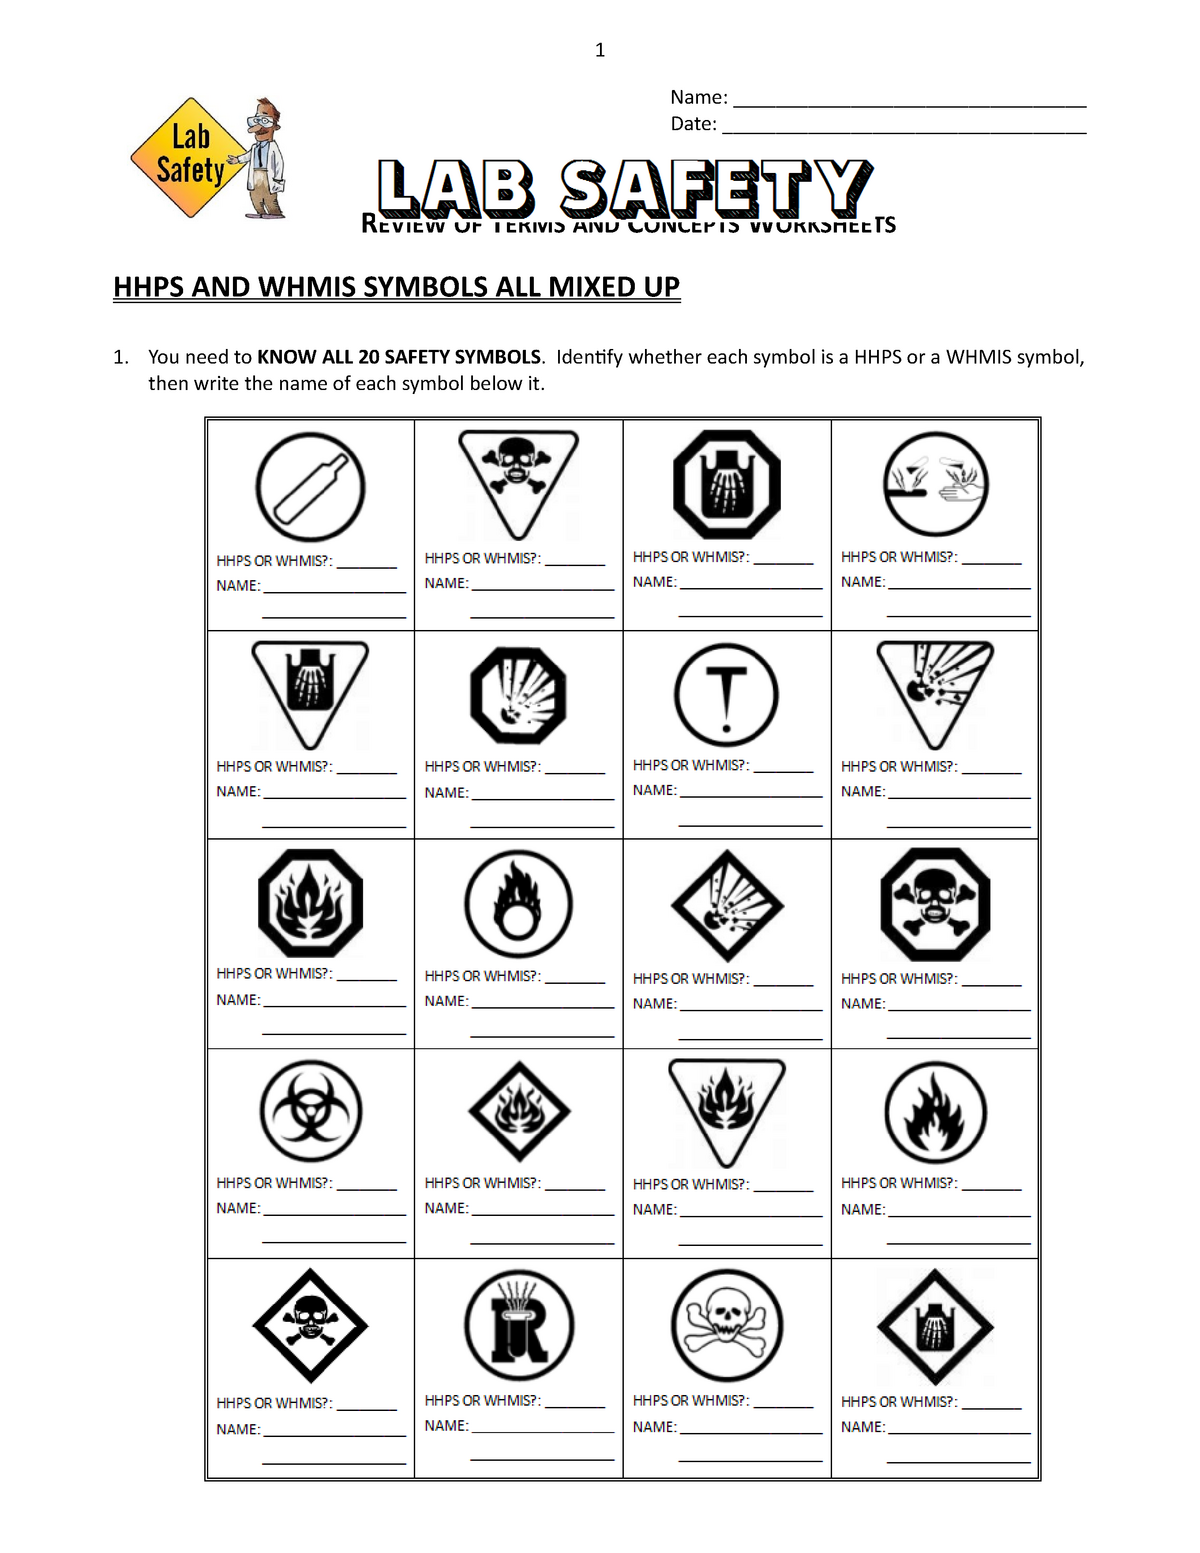 Lab Safety WS - Best - Name: _________________________________ Date ...